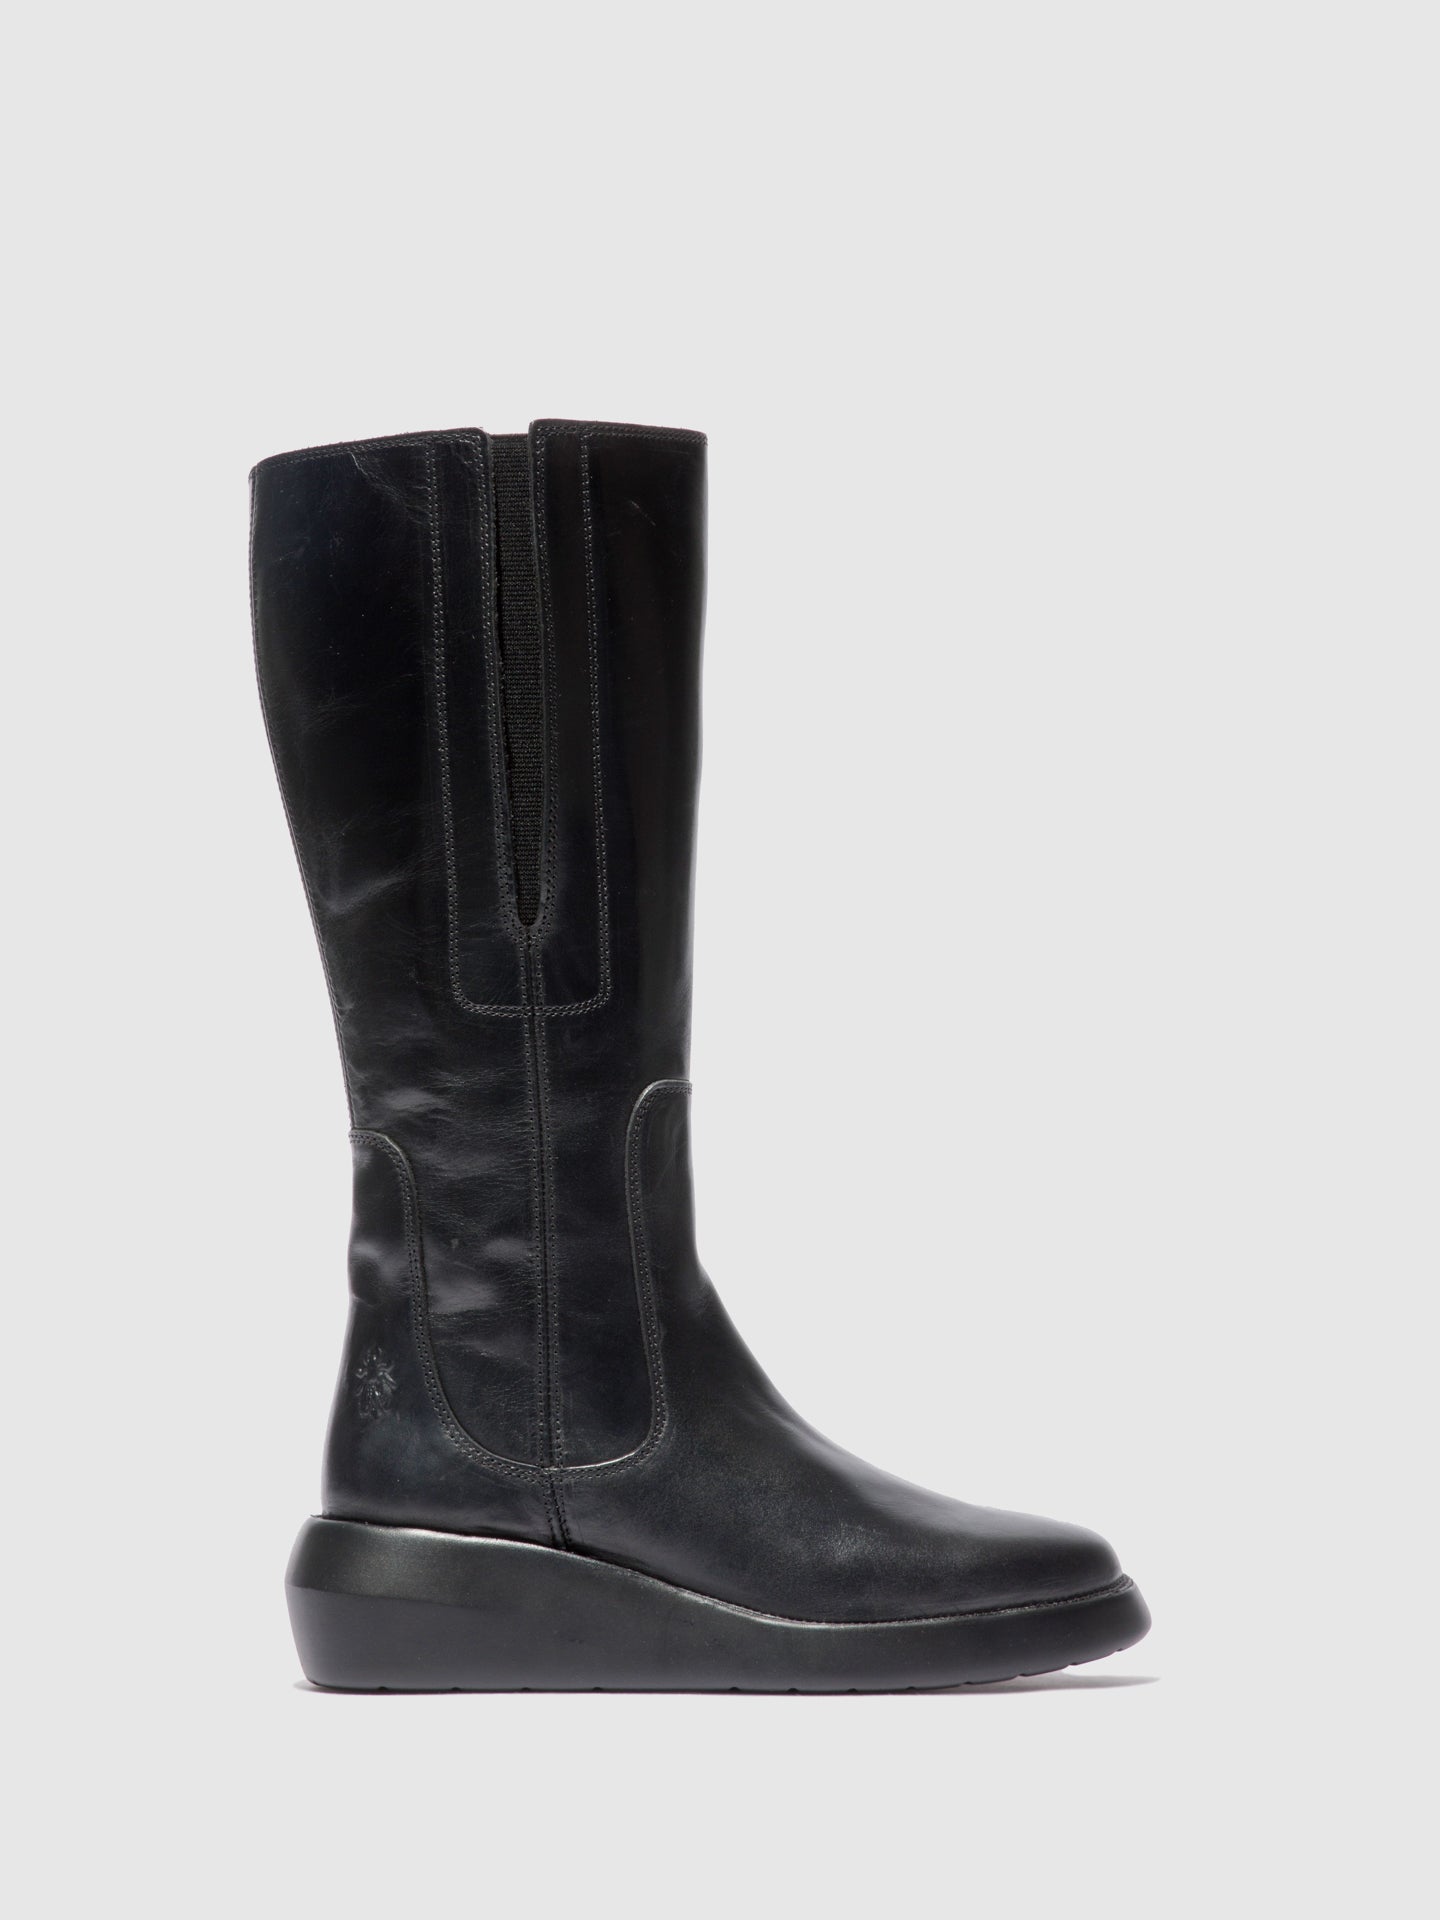 Fly London Zip Up Boots BOLA503FLY RUG BLACK